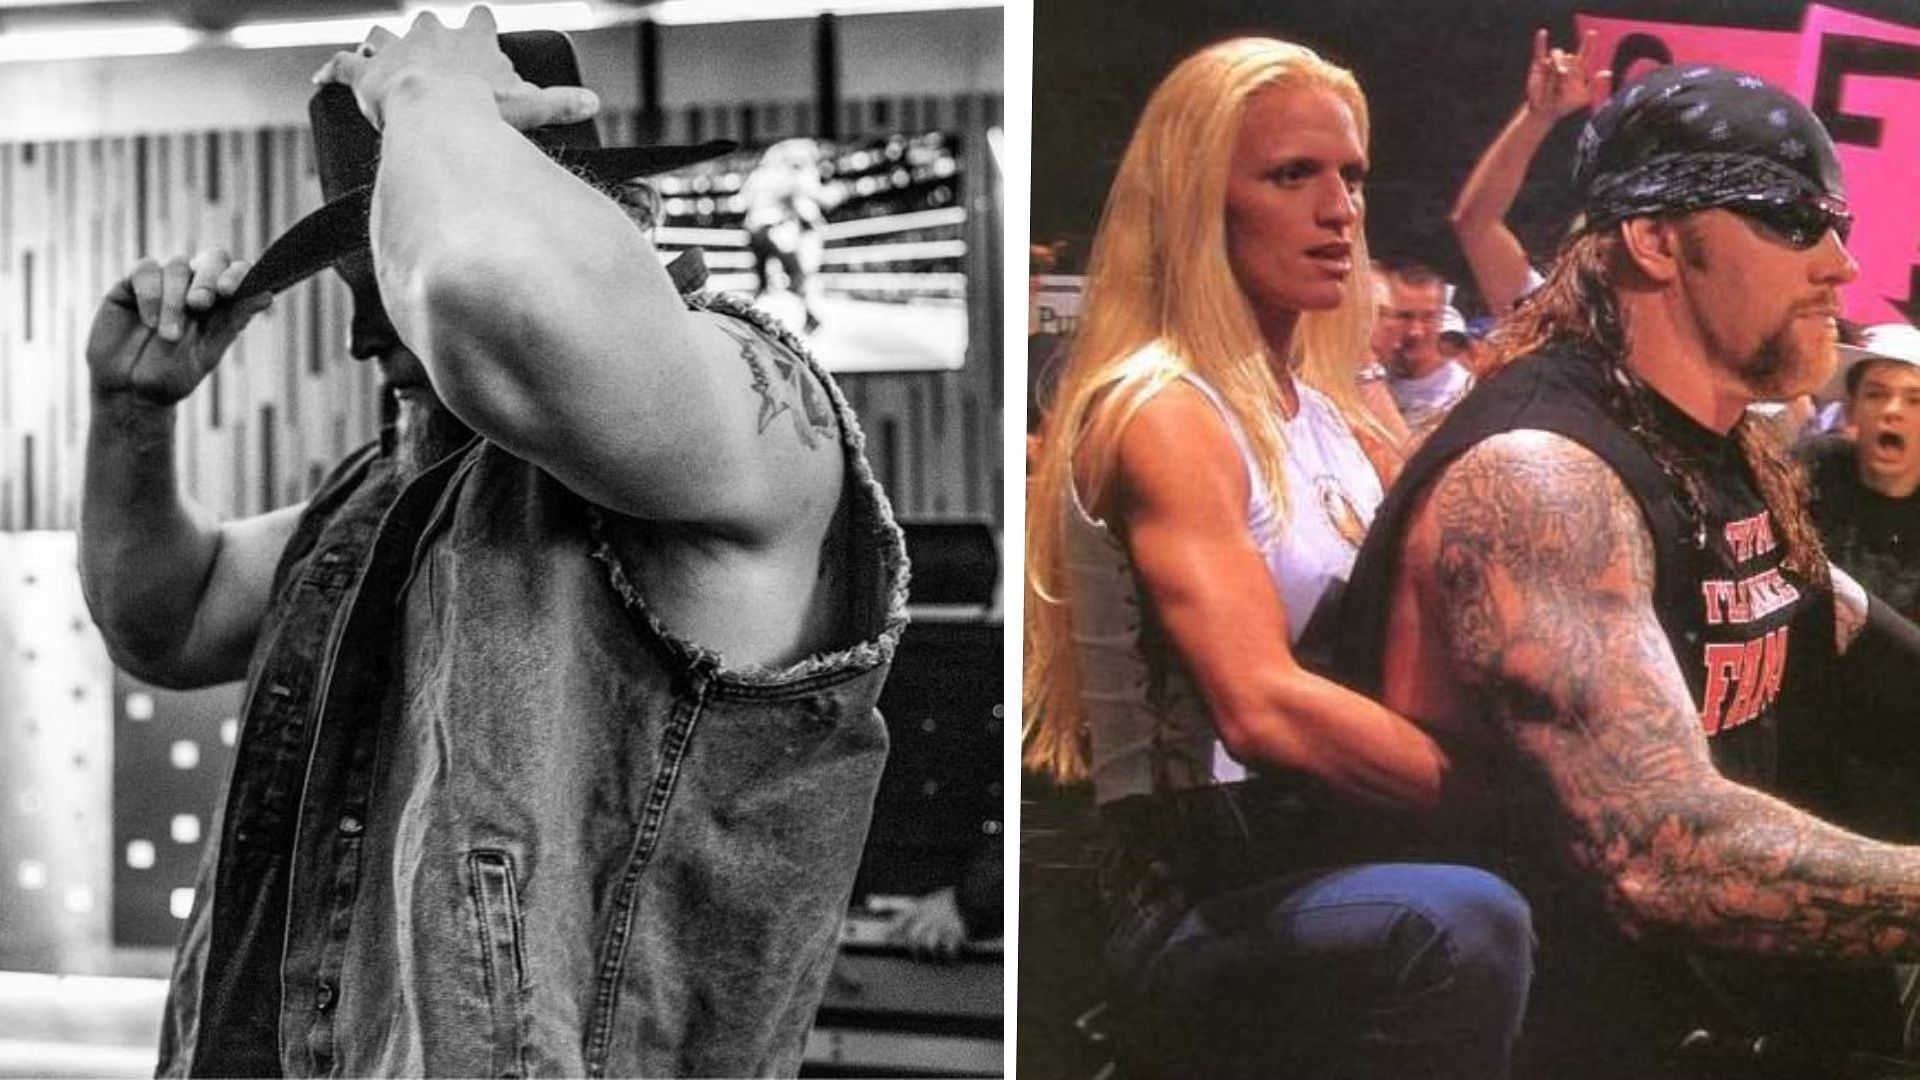 Brock Lesnar and The Undertaker had a legendary feud